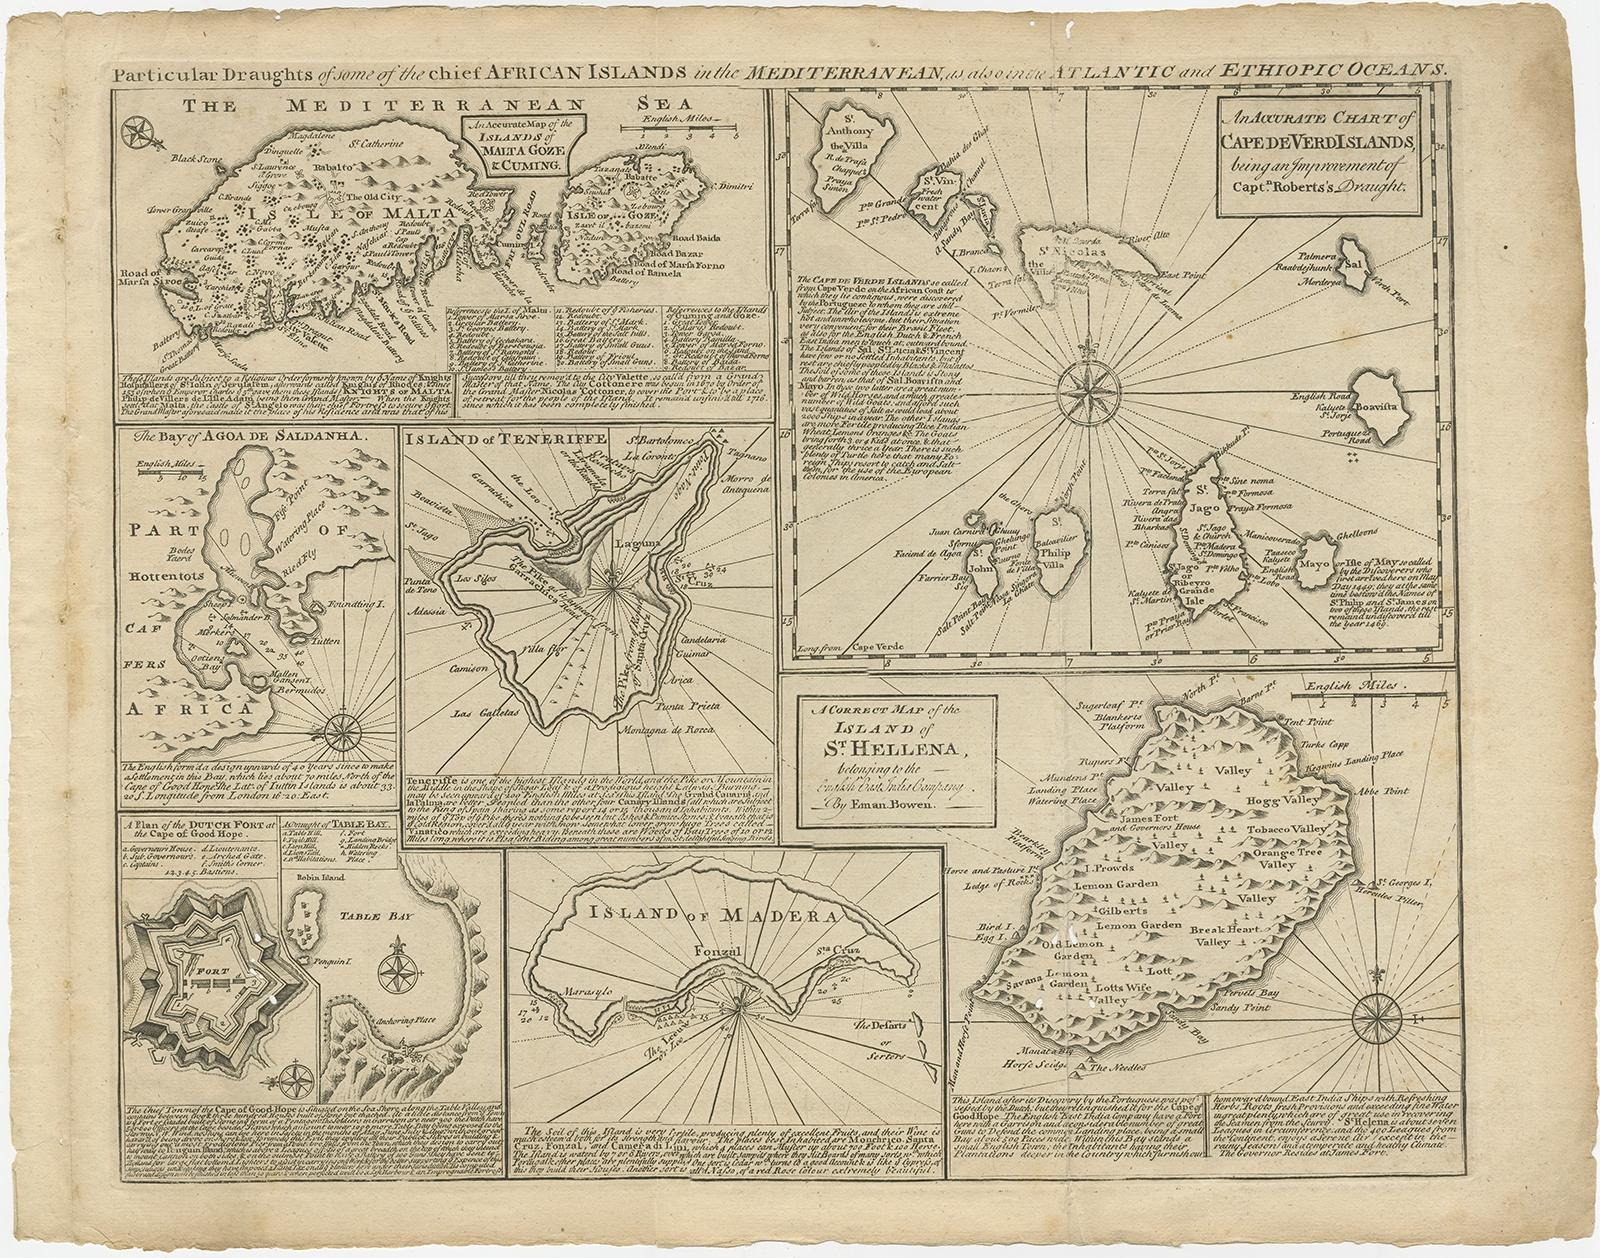 Antique map titled 'Particular draughts of some of the chief African Islands in the Mediterranean (..)'. 

Detailed set of eight maps, including a large and detailed Malta, the Bay of Agoa de Saldanha, Tenerife, the Dutch Fortress at the Cape of